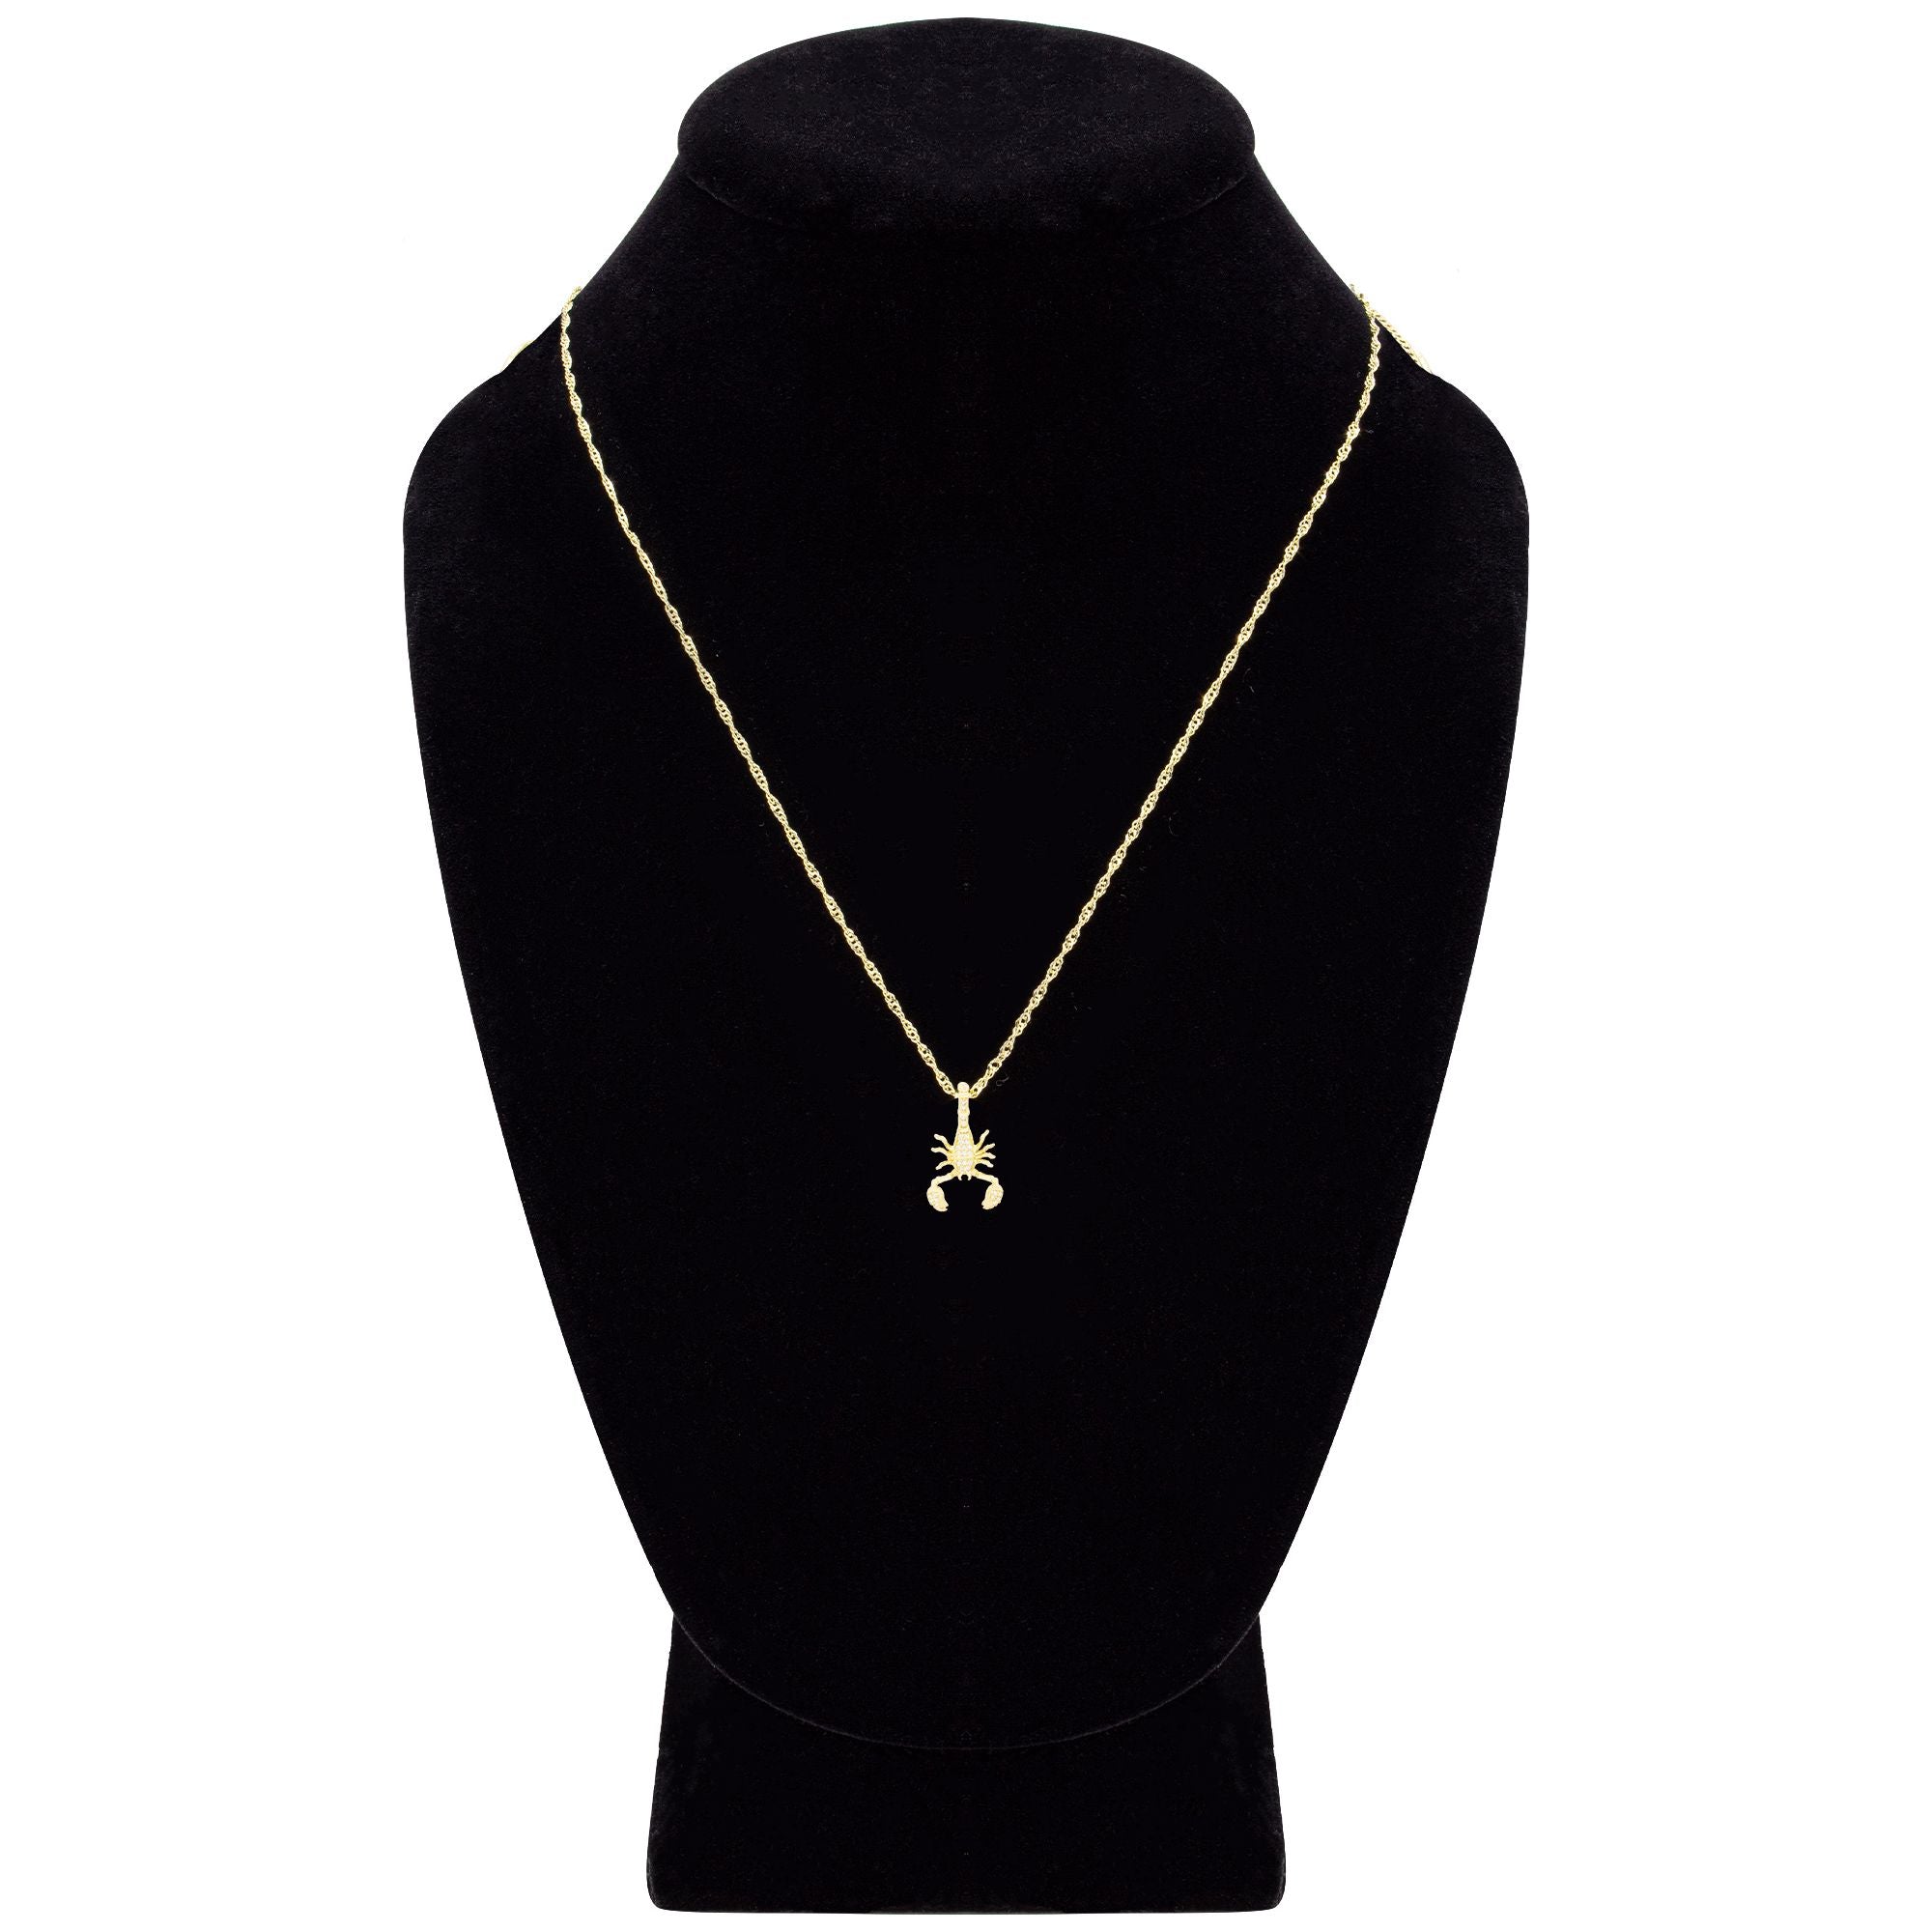 Scorpion Cubic Zirconia Pendant With Necklace Set 14K Gold Filled